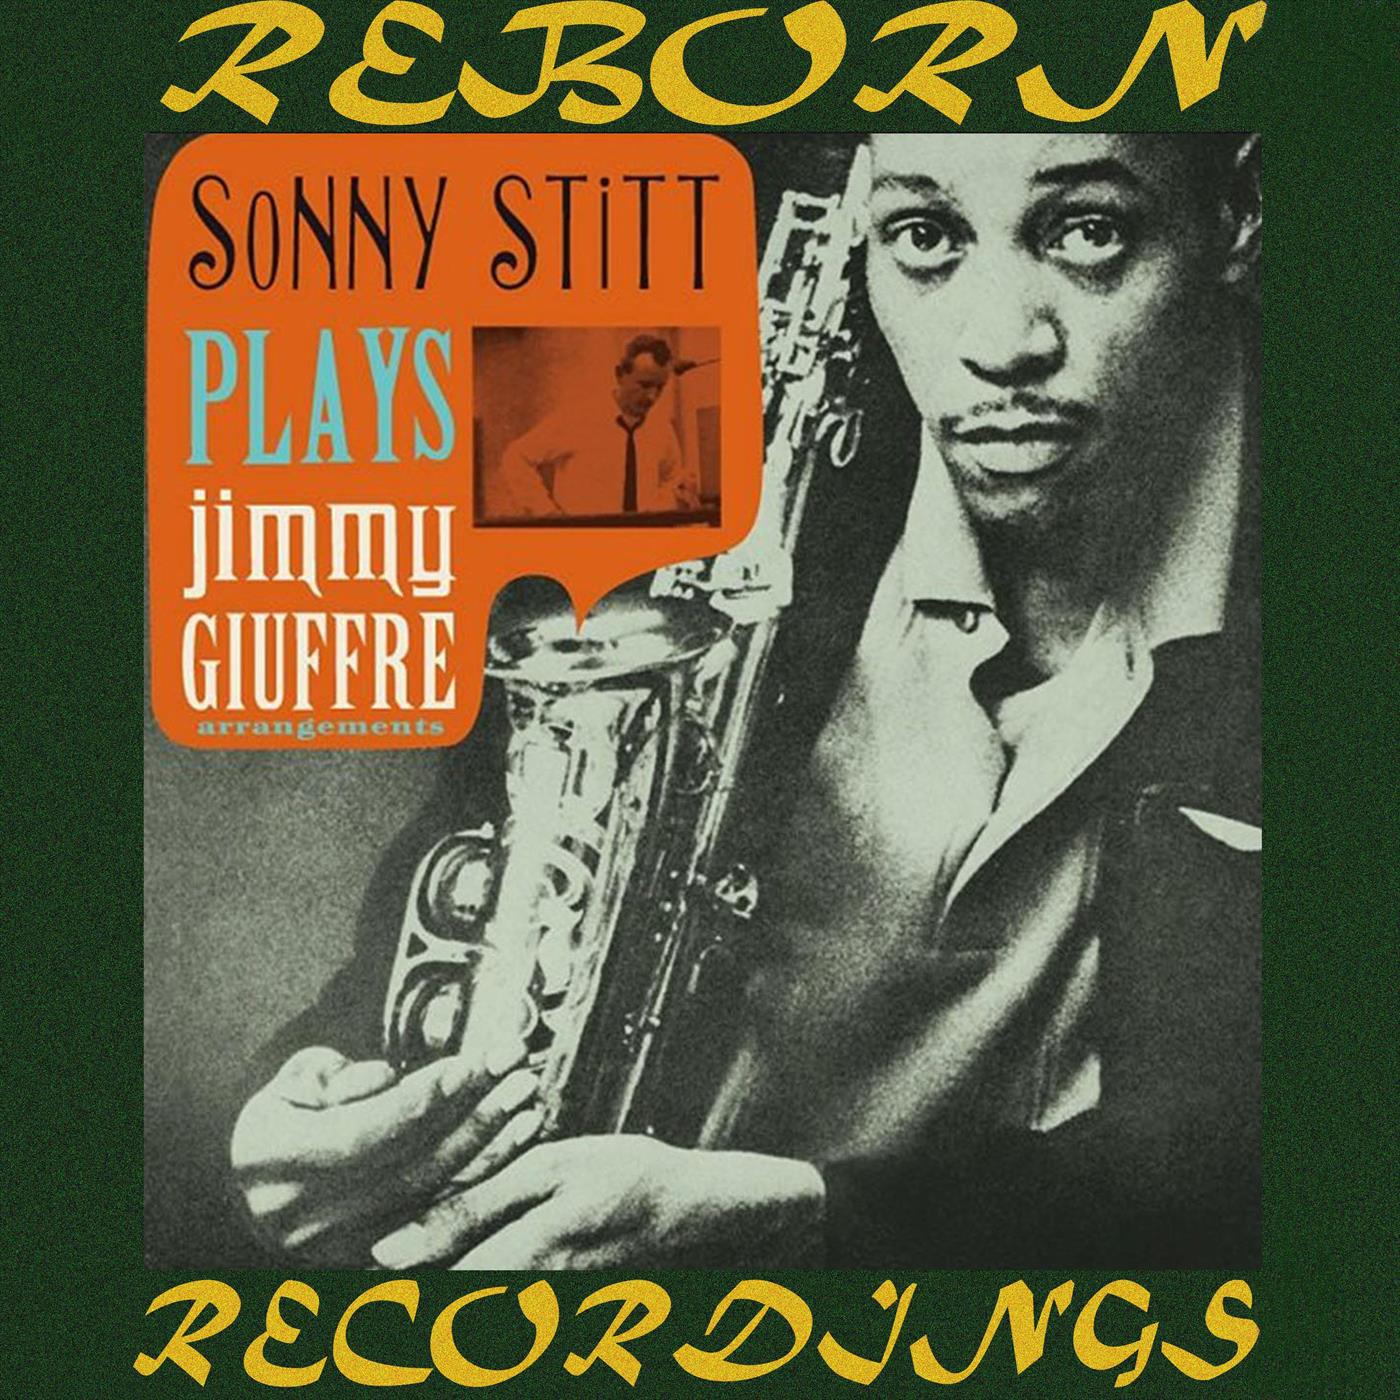 Plays Jimmy Giuffre Arrangements (HD Remastered)